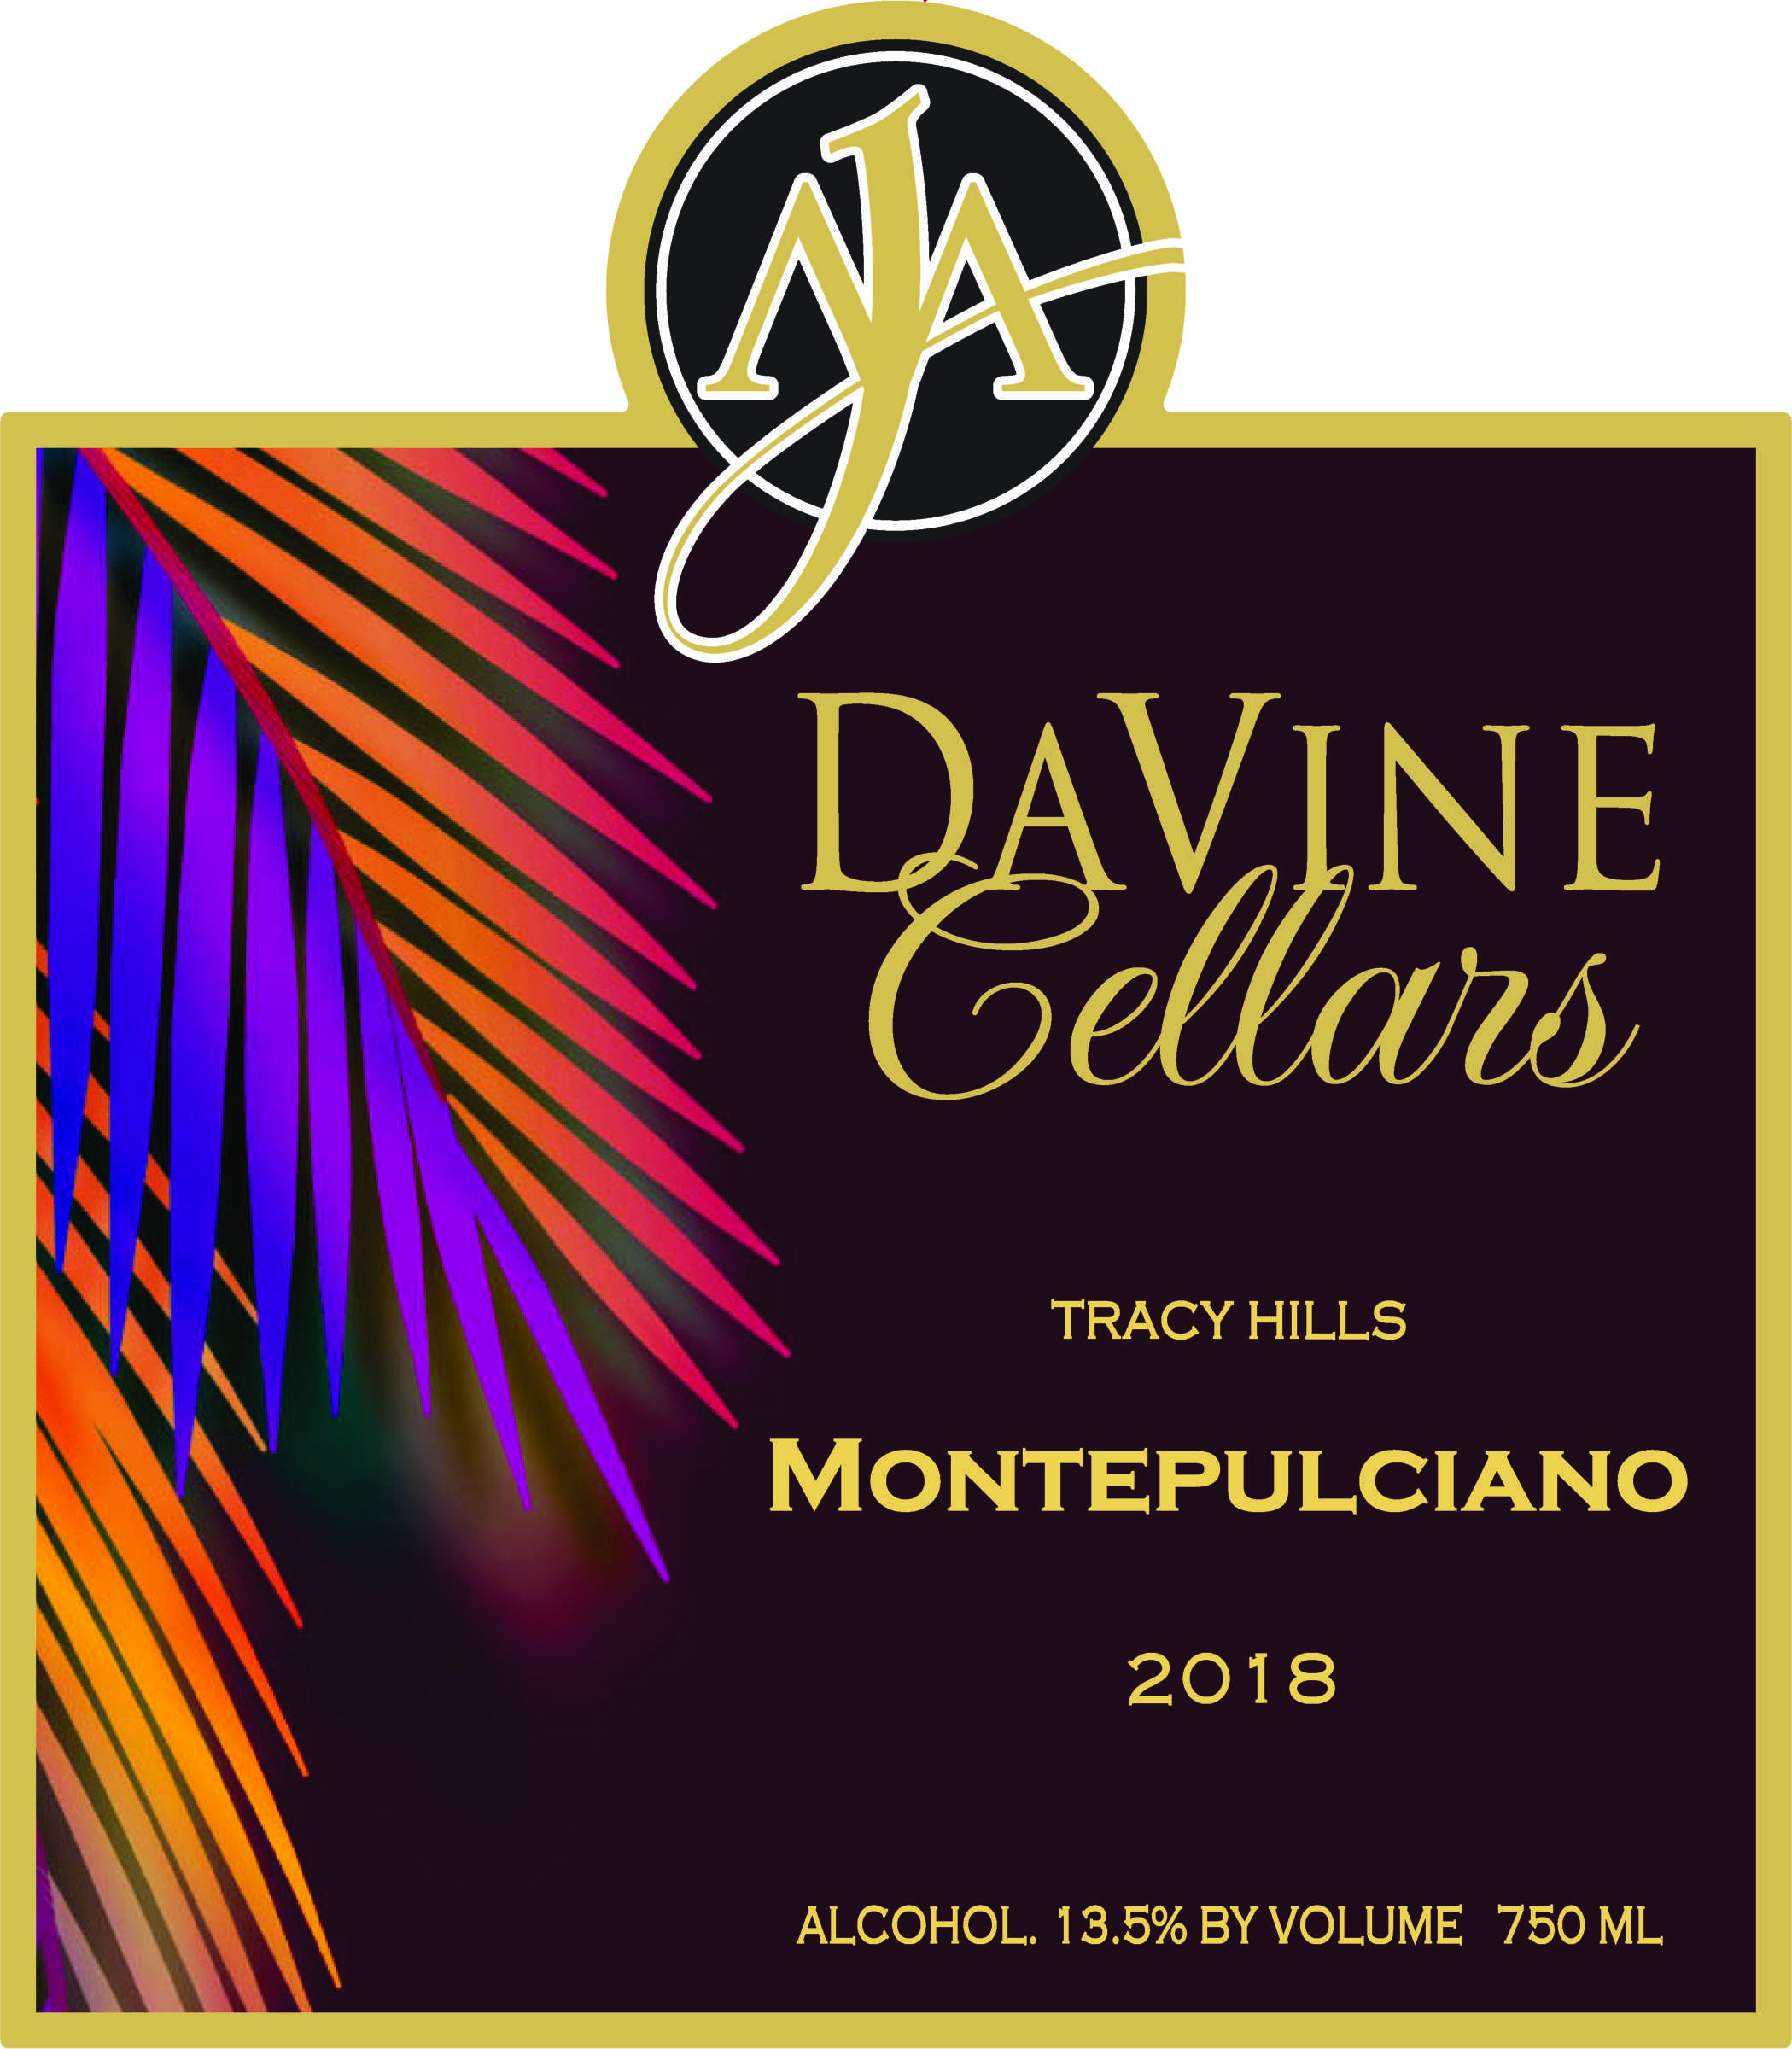 Product Image for 2018 Tracy Hills Montepulciano "Dego Red"